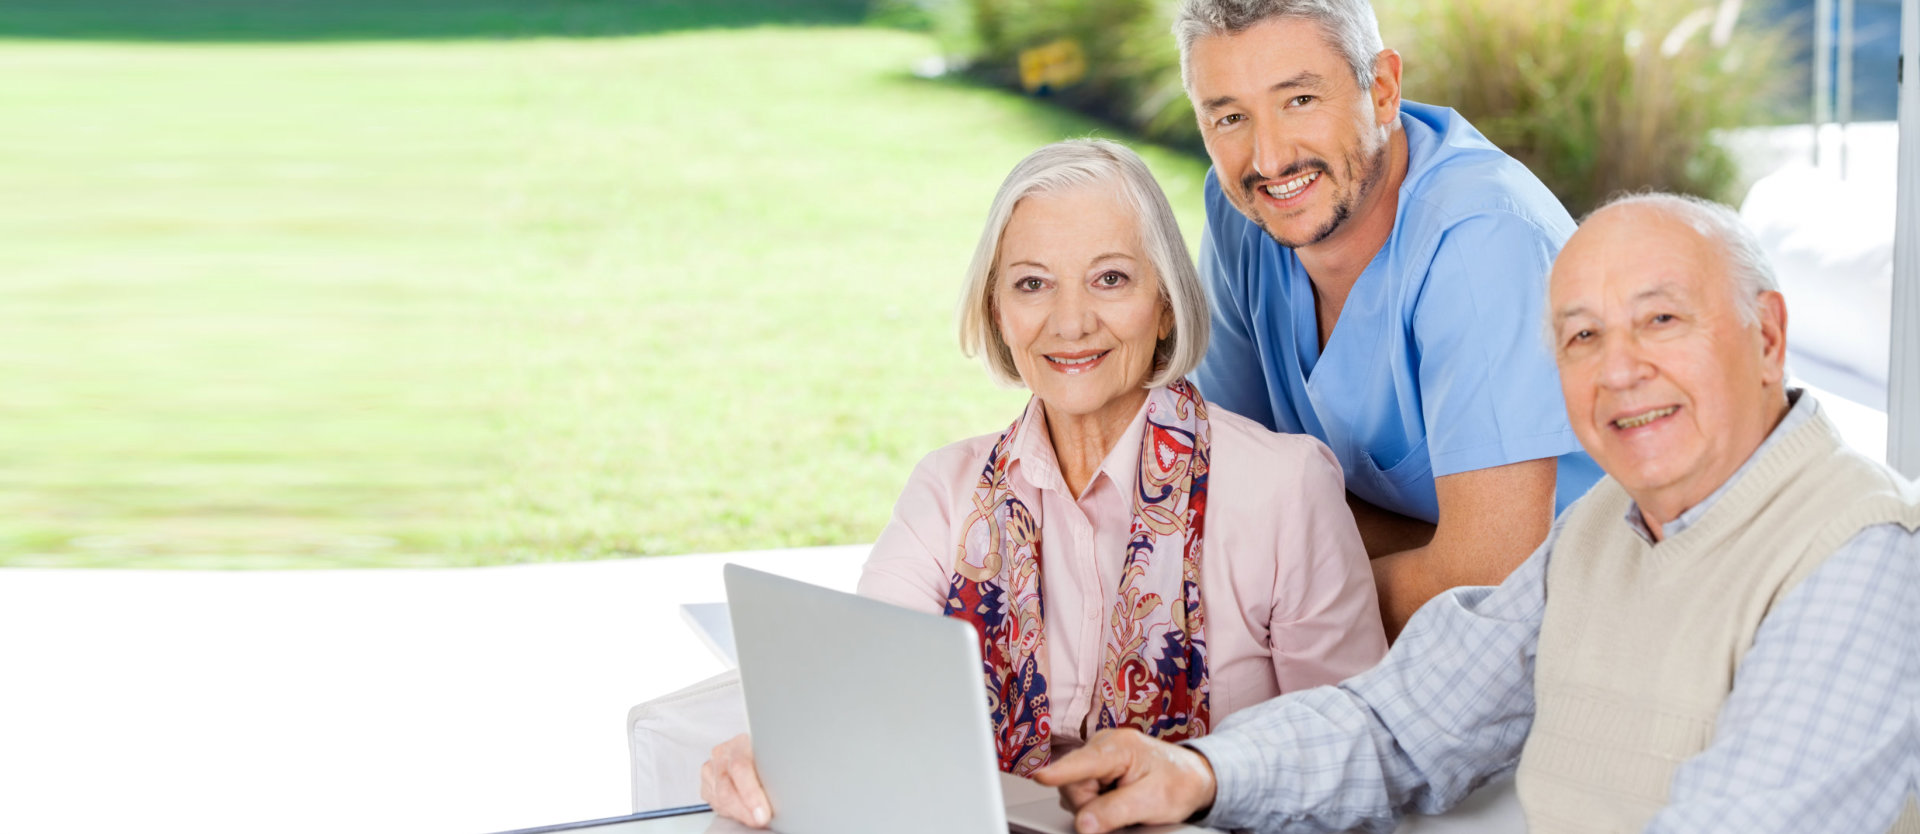 Portrait of smiling male caretaker and senior couple with laptop at nursing home porch